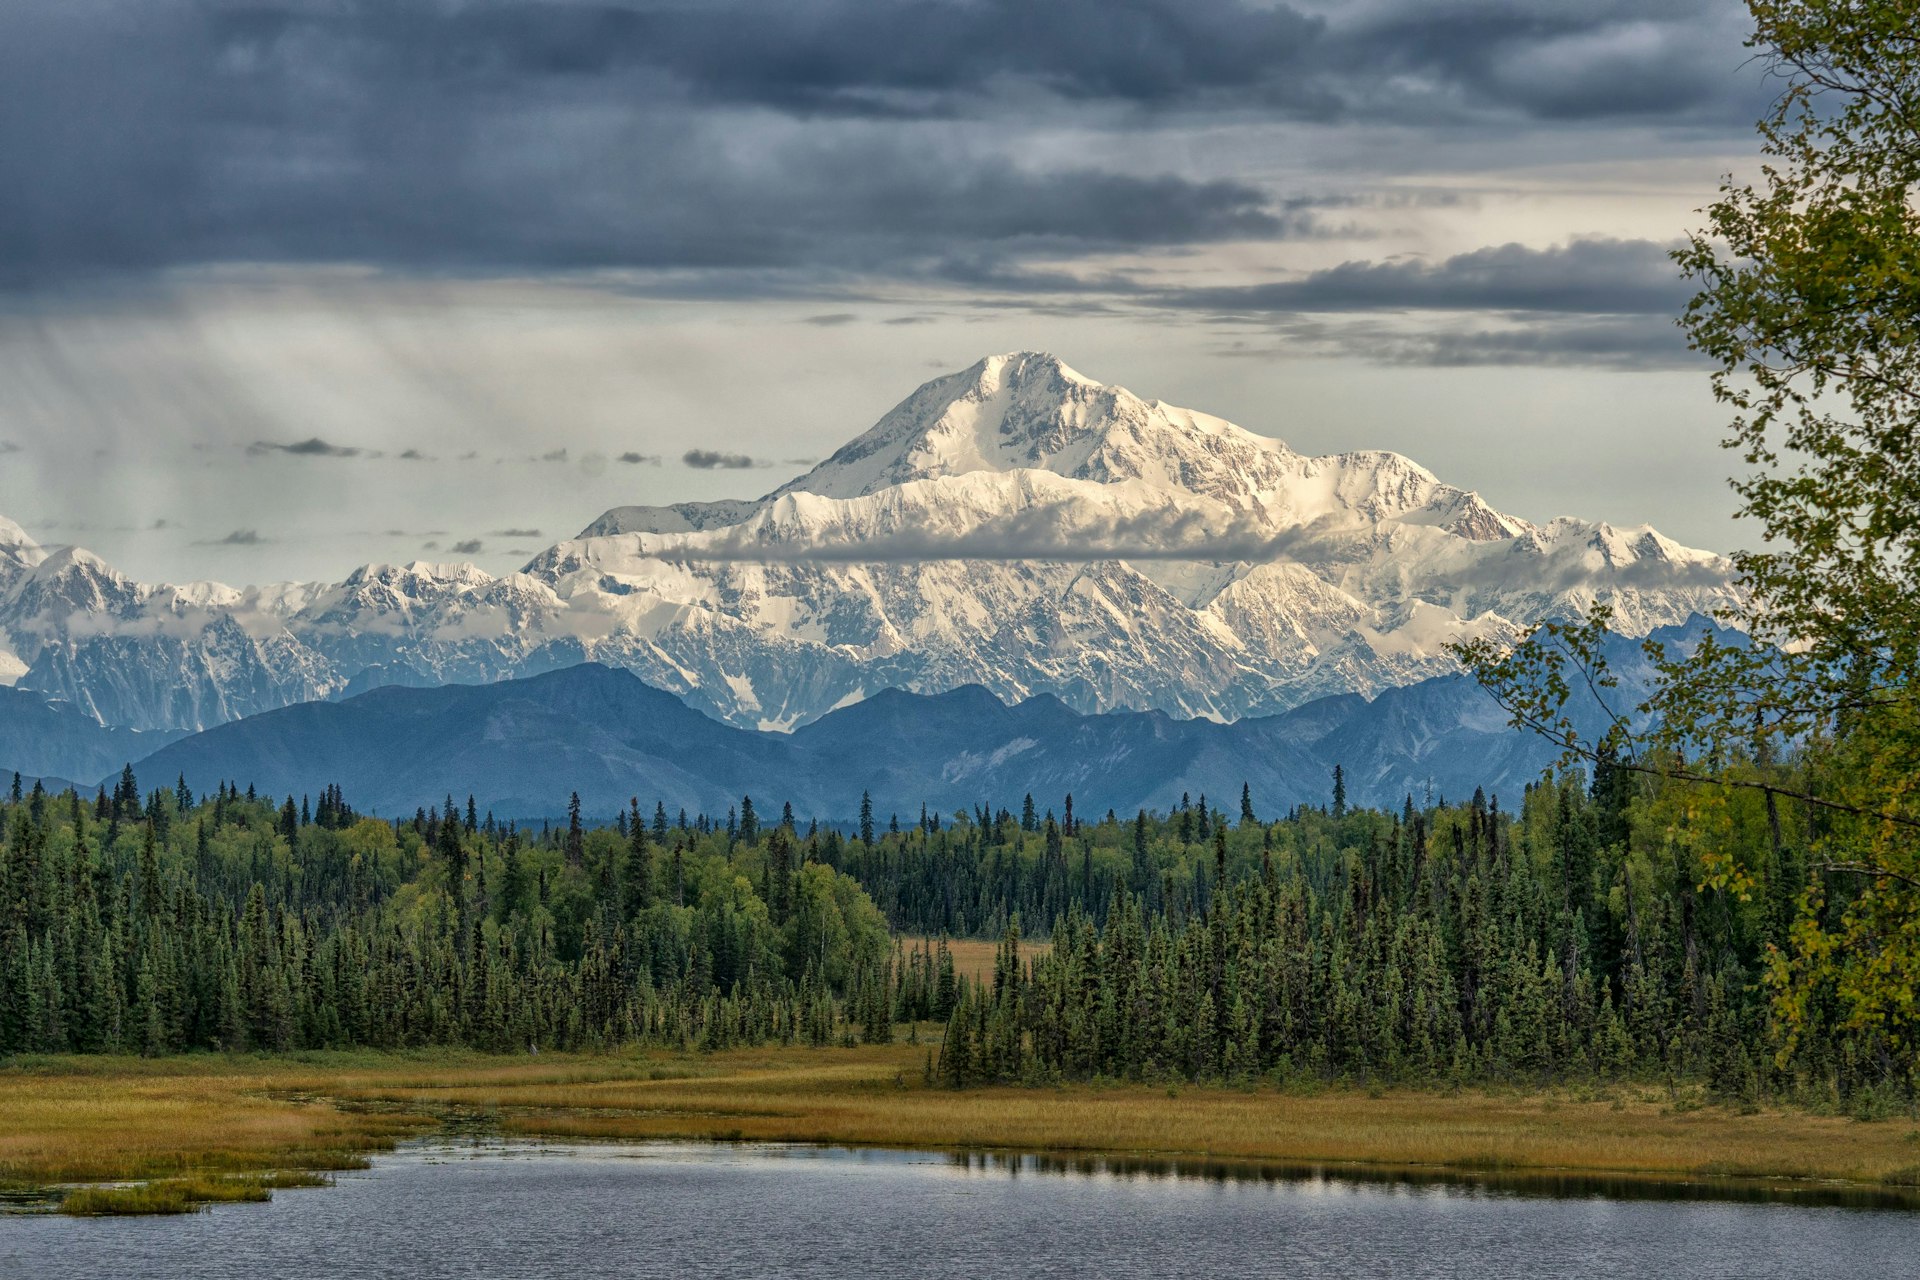 500px Photo ID: 123806719 - Denali: the highest peak on the North American Continent on a stormy day.